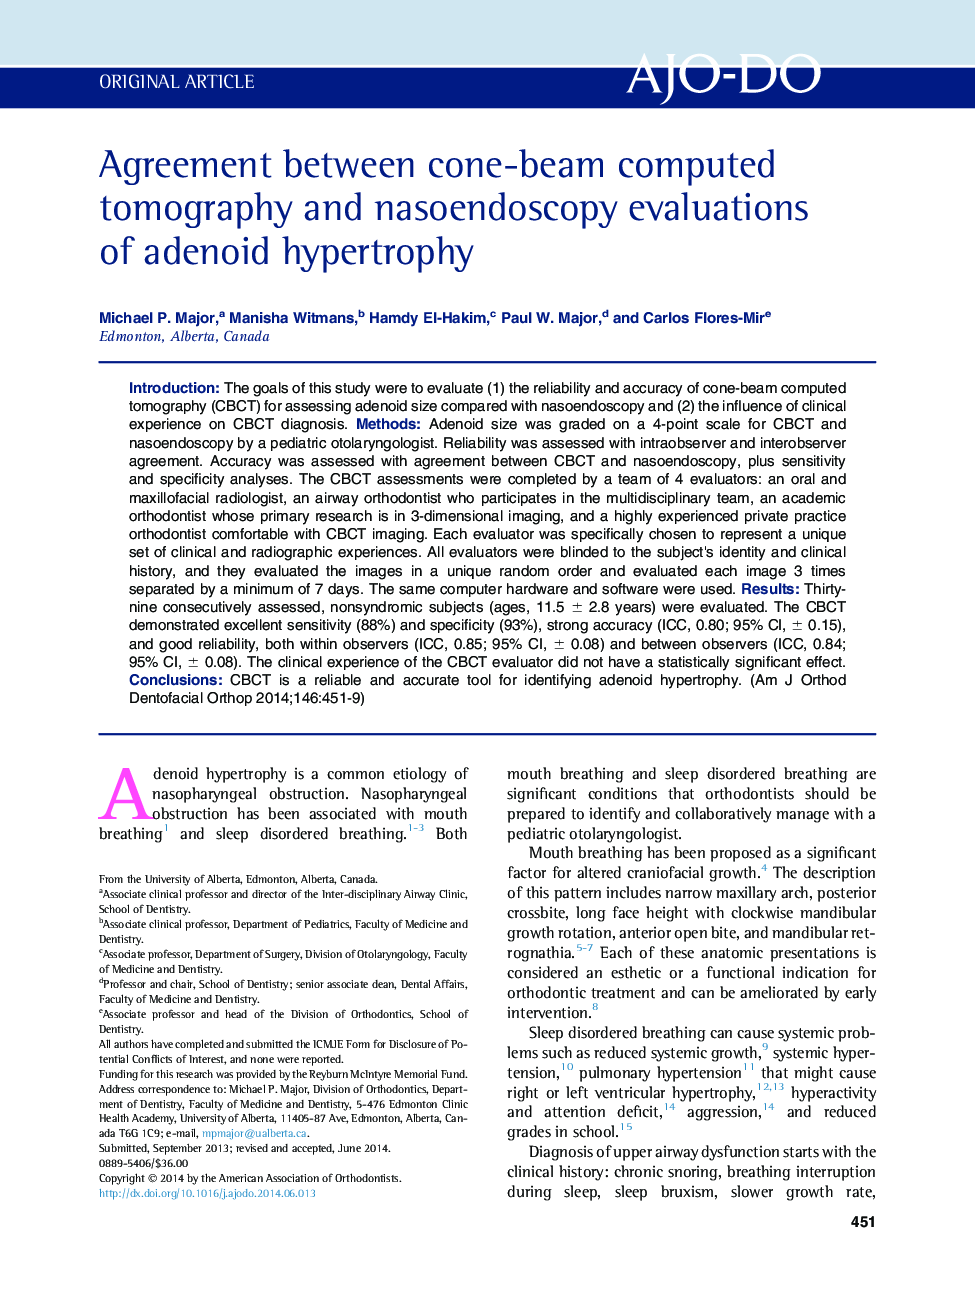 Agreement between cone-beam computed tomography and nasoendoscopy evaluations of adenoid hypertrophy 